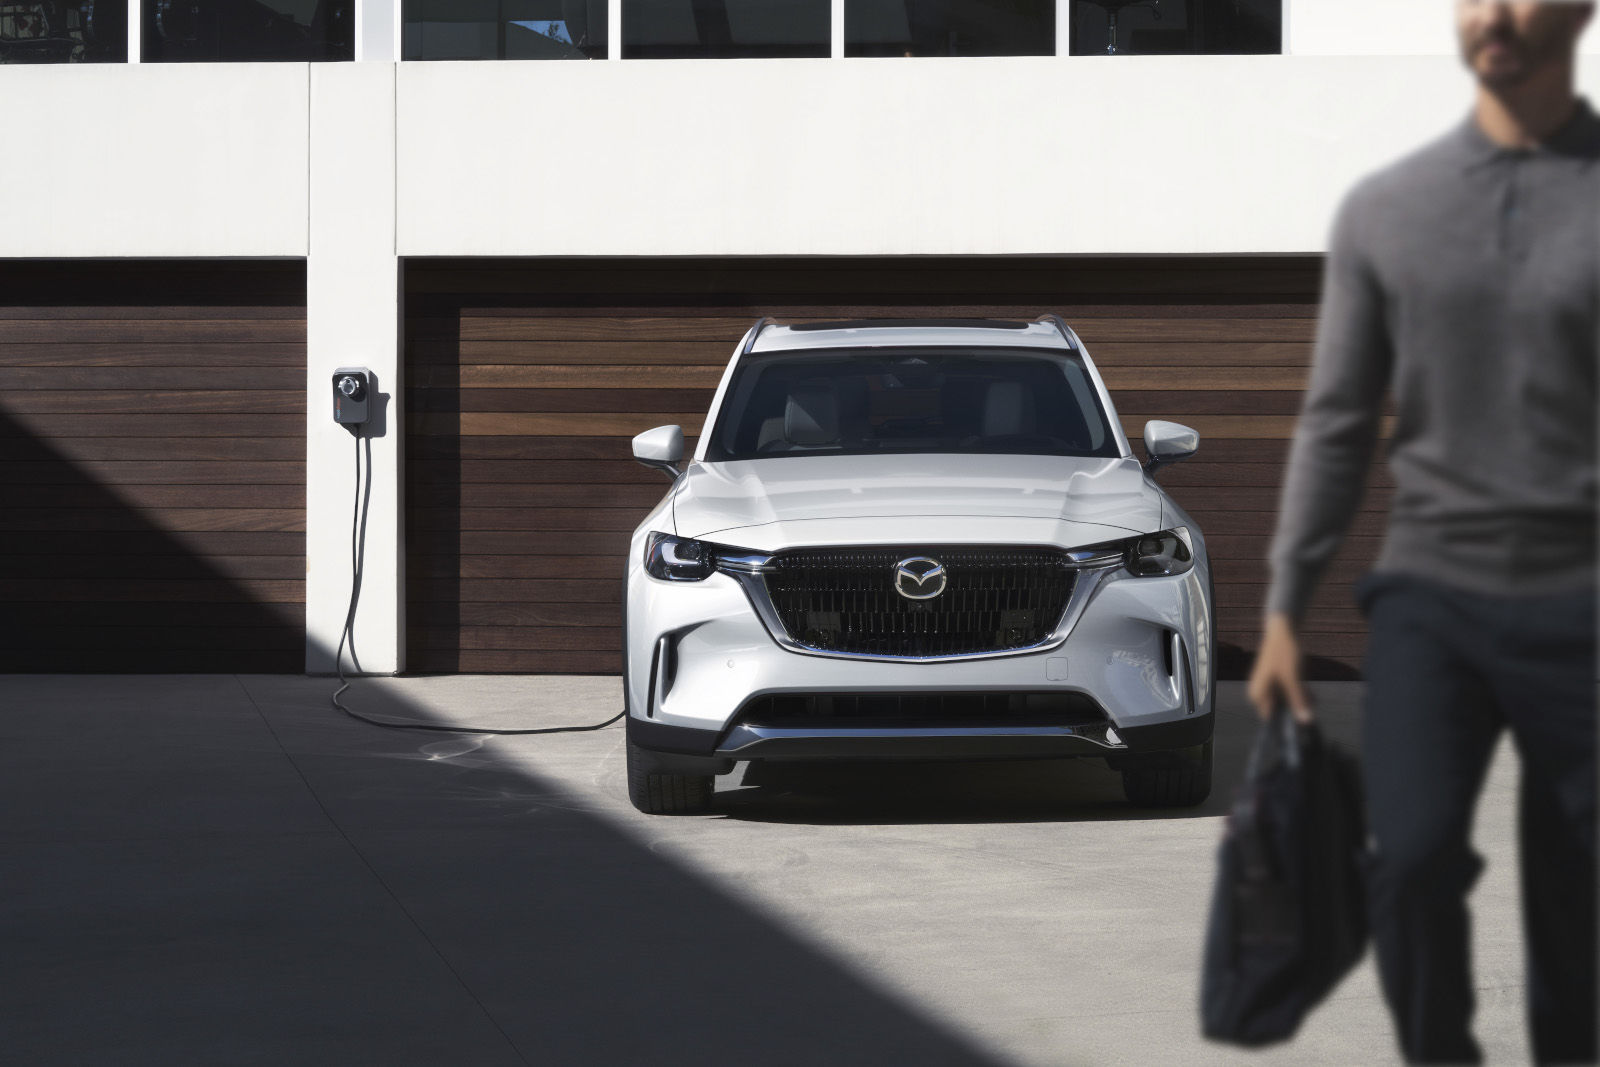 Mazda Announces its Adoption of the North American Charging Standard